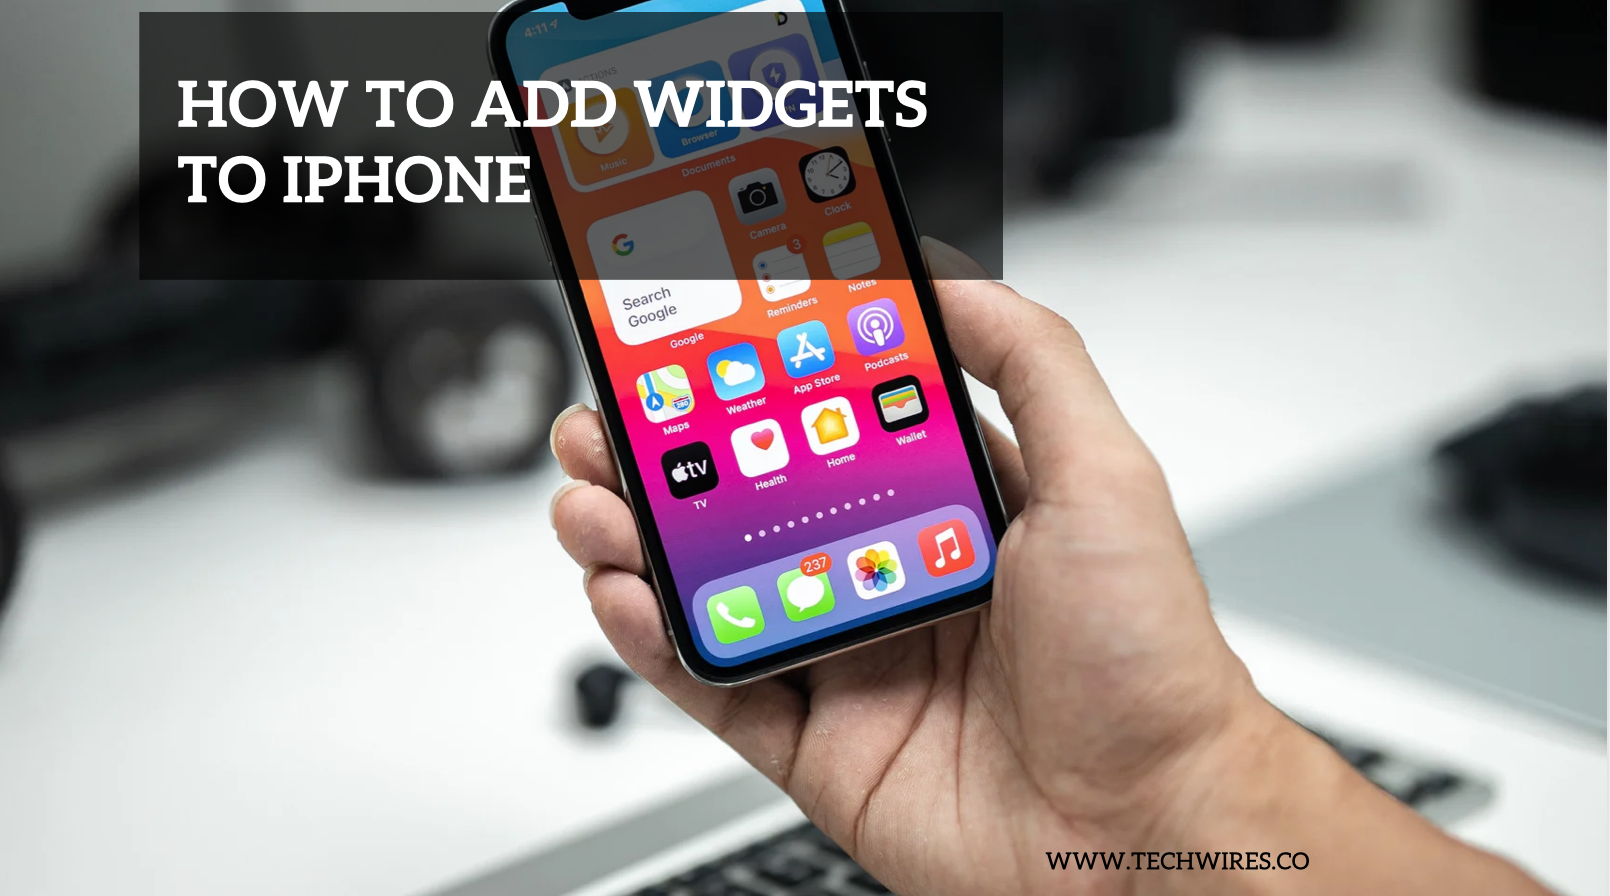 How to Add Widgets to iPhone - 5 Tips to know